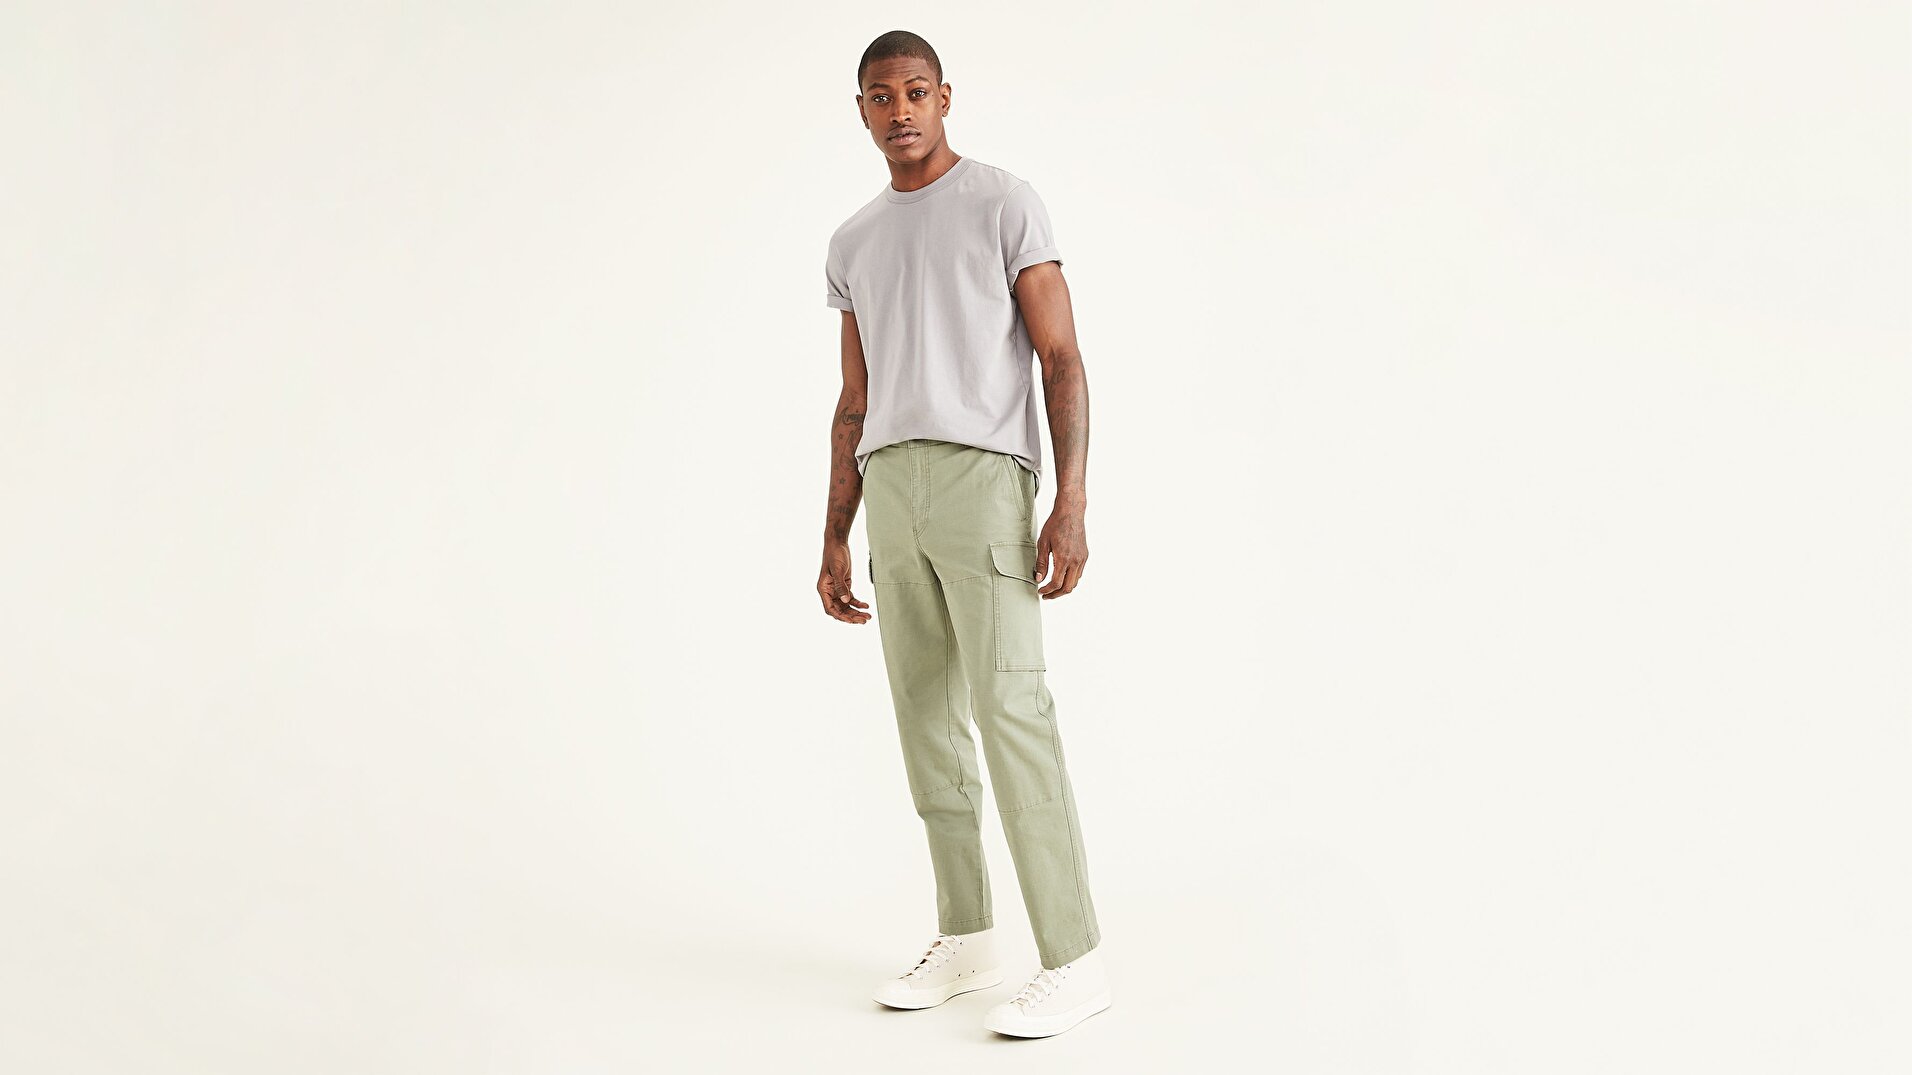 Cargo Pant, Tapered Fit